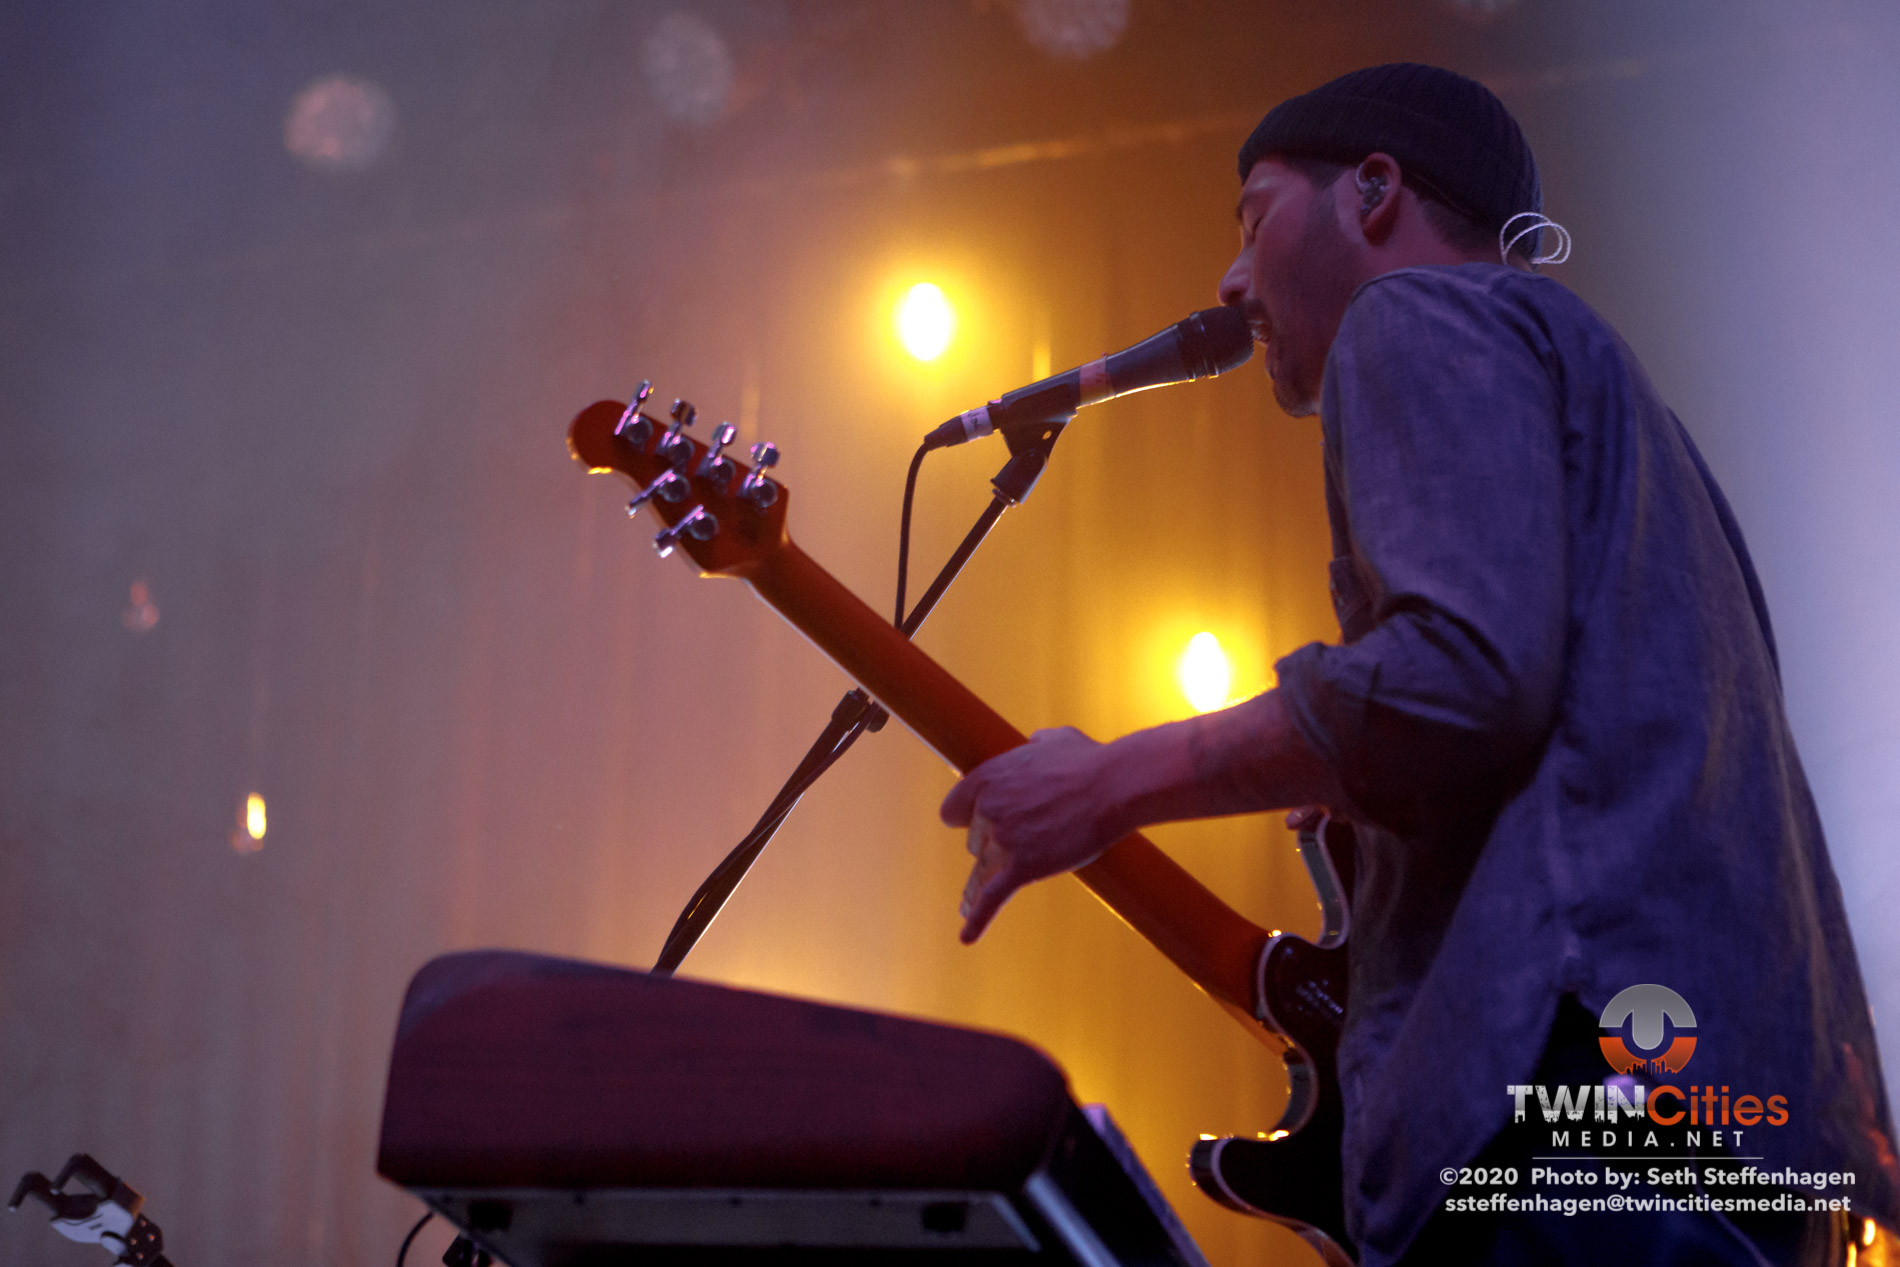 January 30, 2020 - Minneapolis, Minnesota, United States - Thrice live in concert at the First Avenue along with mewithoutYou, Drug Church and Holy Fawn as the openers.

(Photo by Seth Steffenhagen/Steffenhagen Photography)